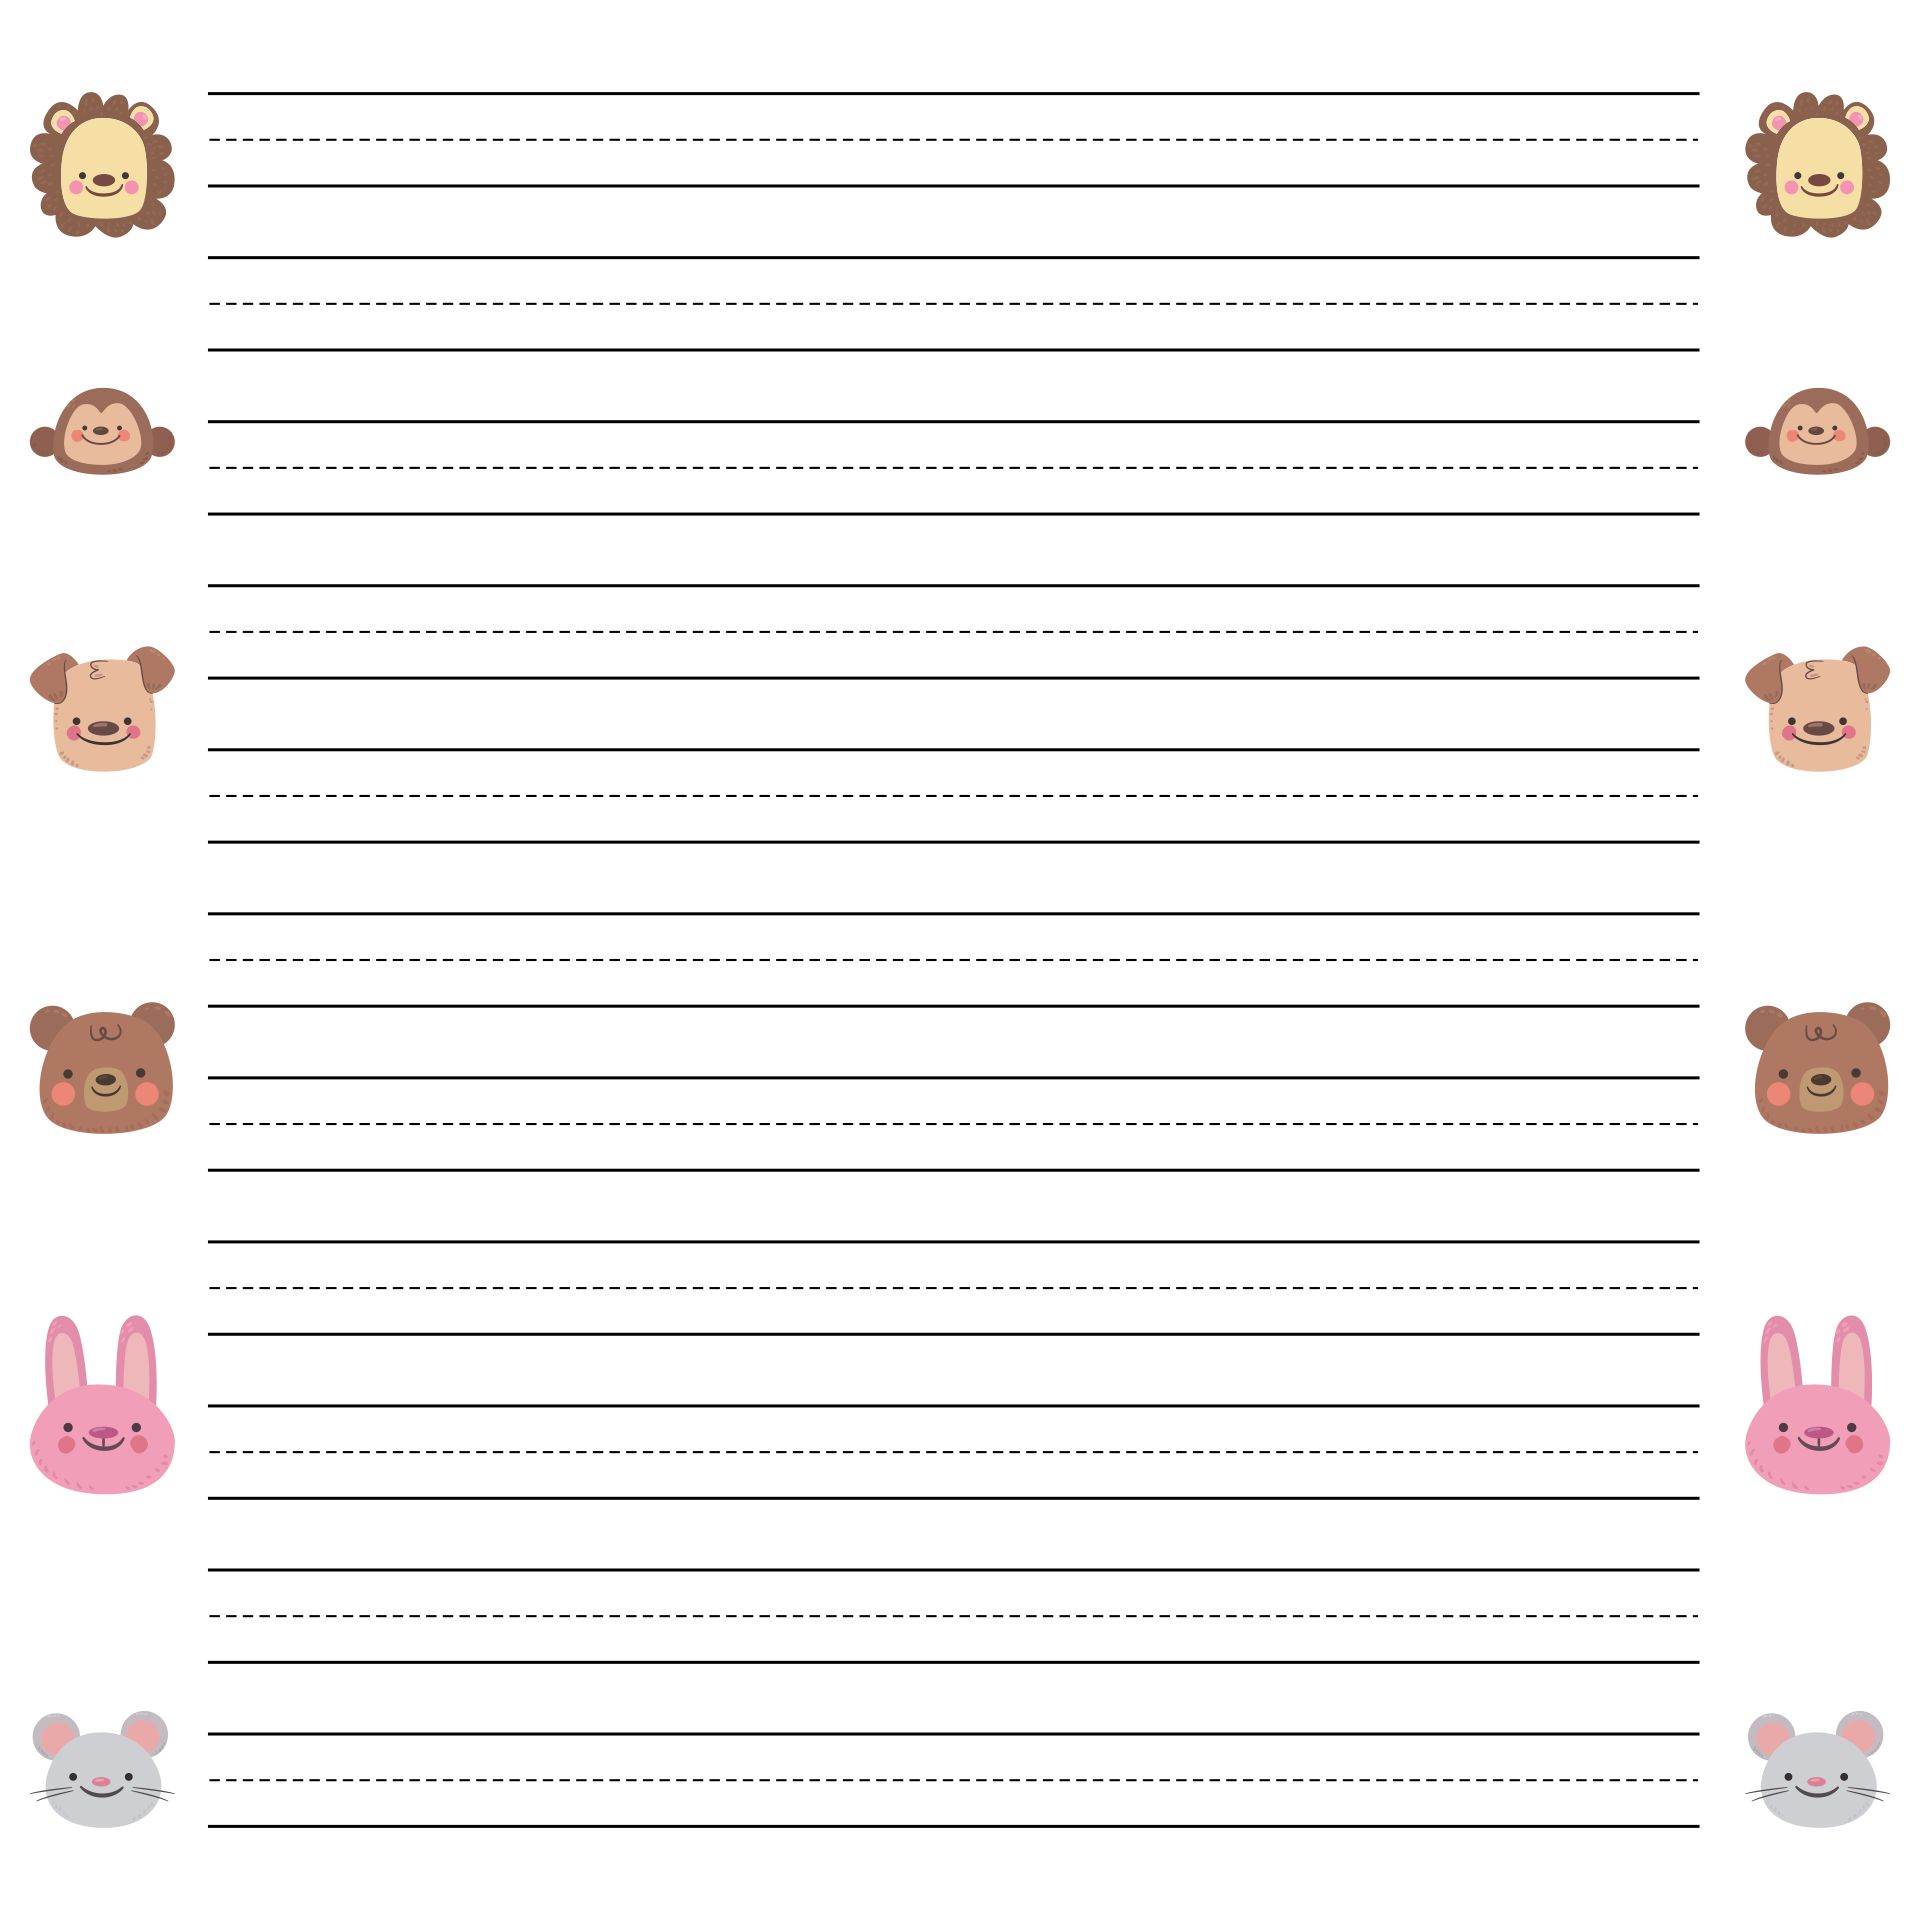 6-best-images-of-free-printable-lined-writing-paper-template-printable-lined-paper-free